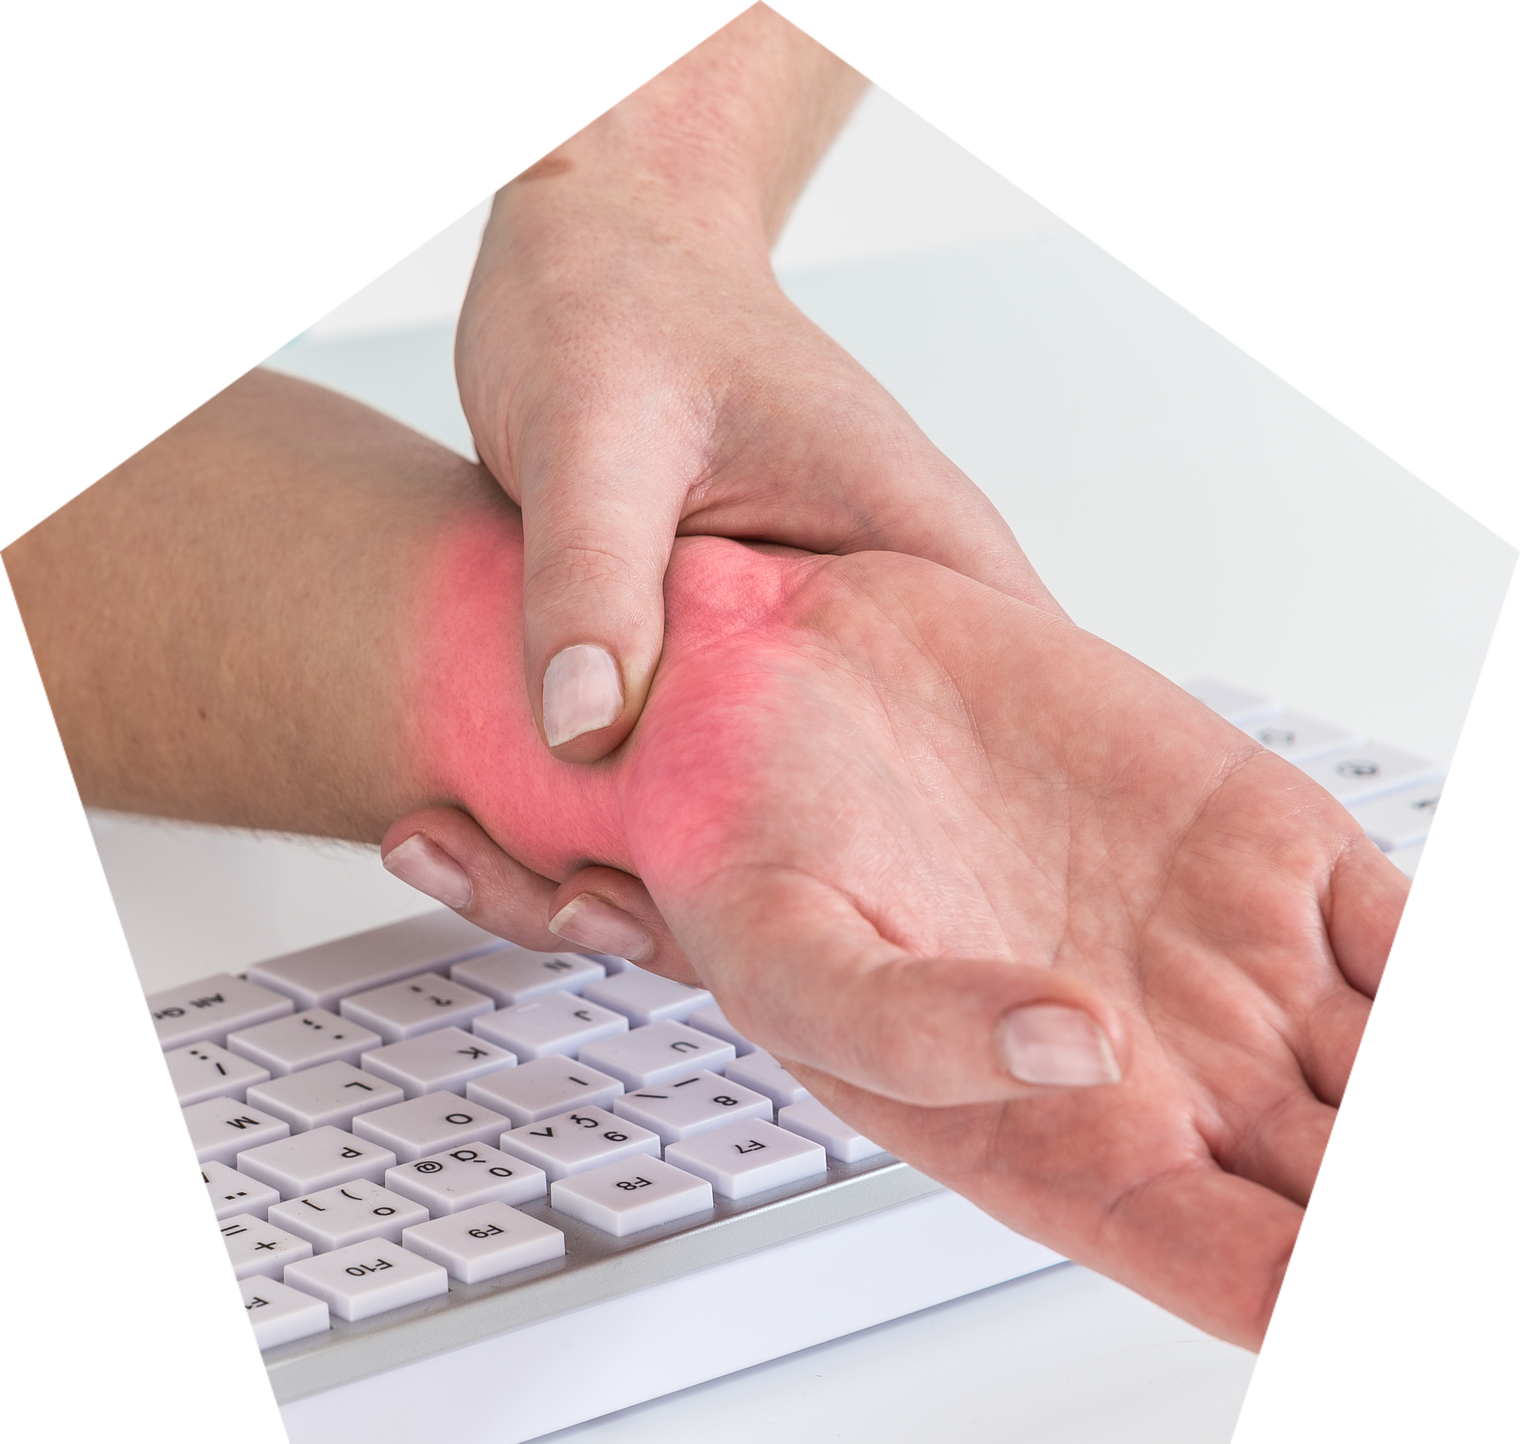 Repetitive Strain Injury relief with massage therapy